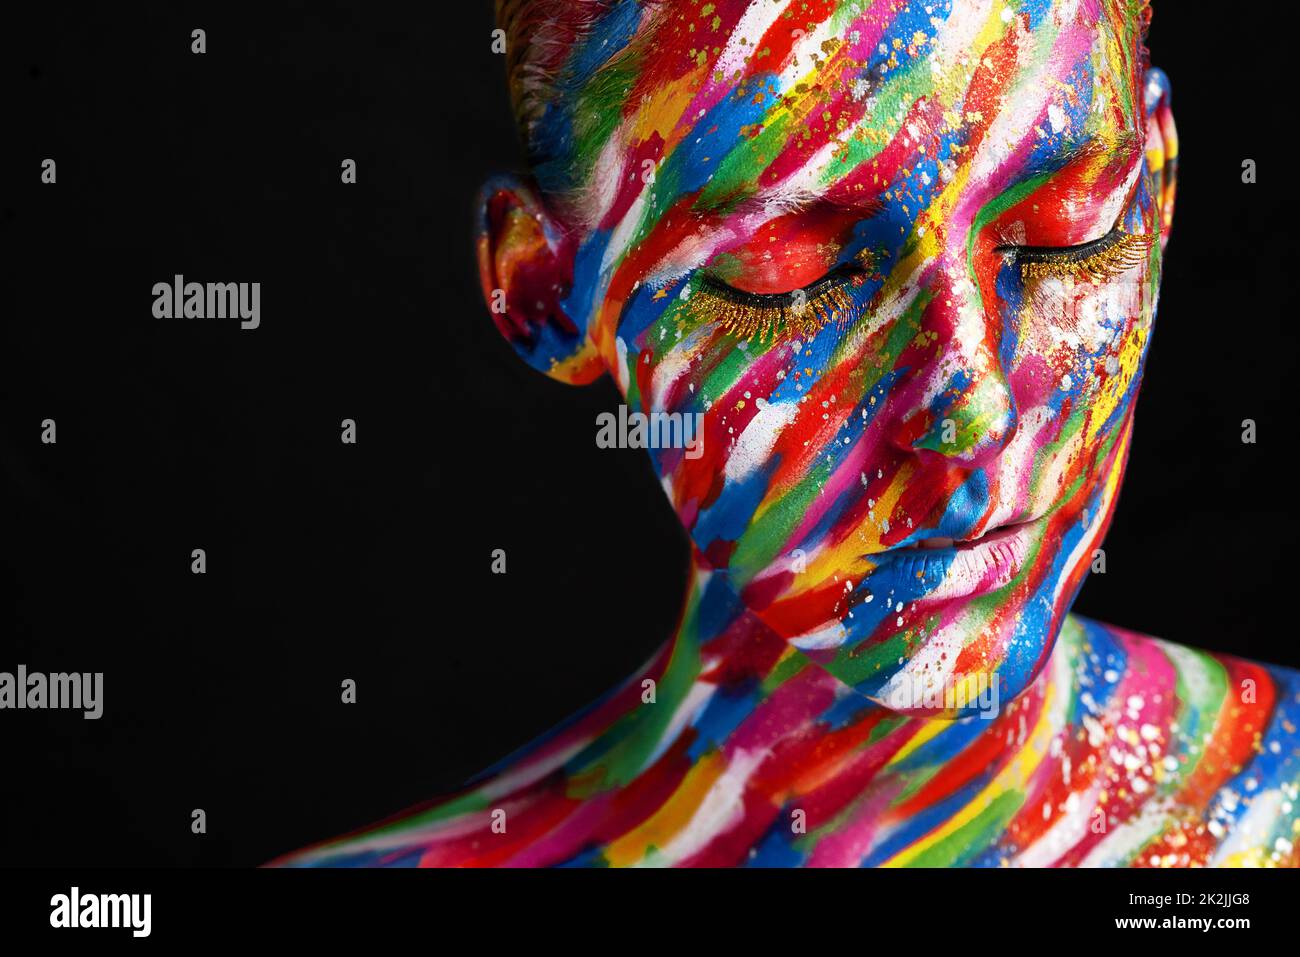 Mega bold makeup. Studio shot of a young woman posing with brightly colored paint on her face against a black background. Stock Photo